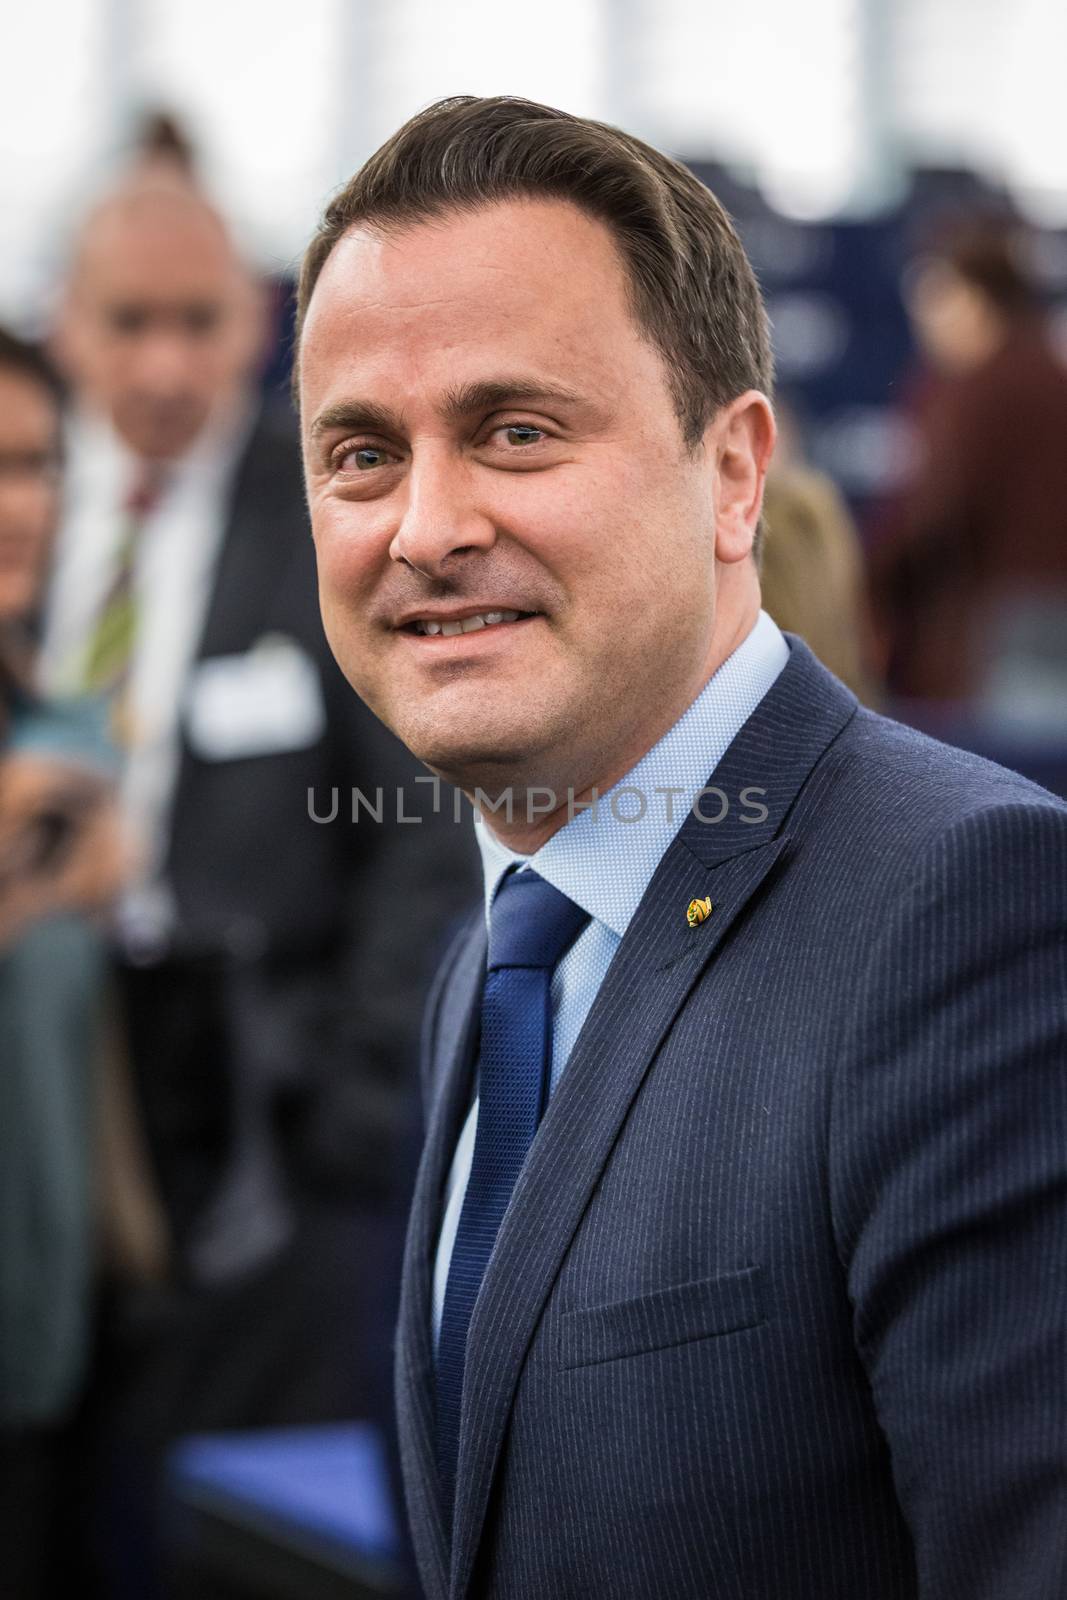 FRANCE, Strasbourg: Luxembourg's Prime Minister Xavier Bettel presents a review of the Luxembourg Presidency of the Council of the EU, which ended on December 31, 2015, during a plenary session at the European Parliament, in Strasbourg, eastern France, on January 19, 2016. 